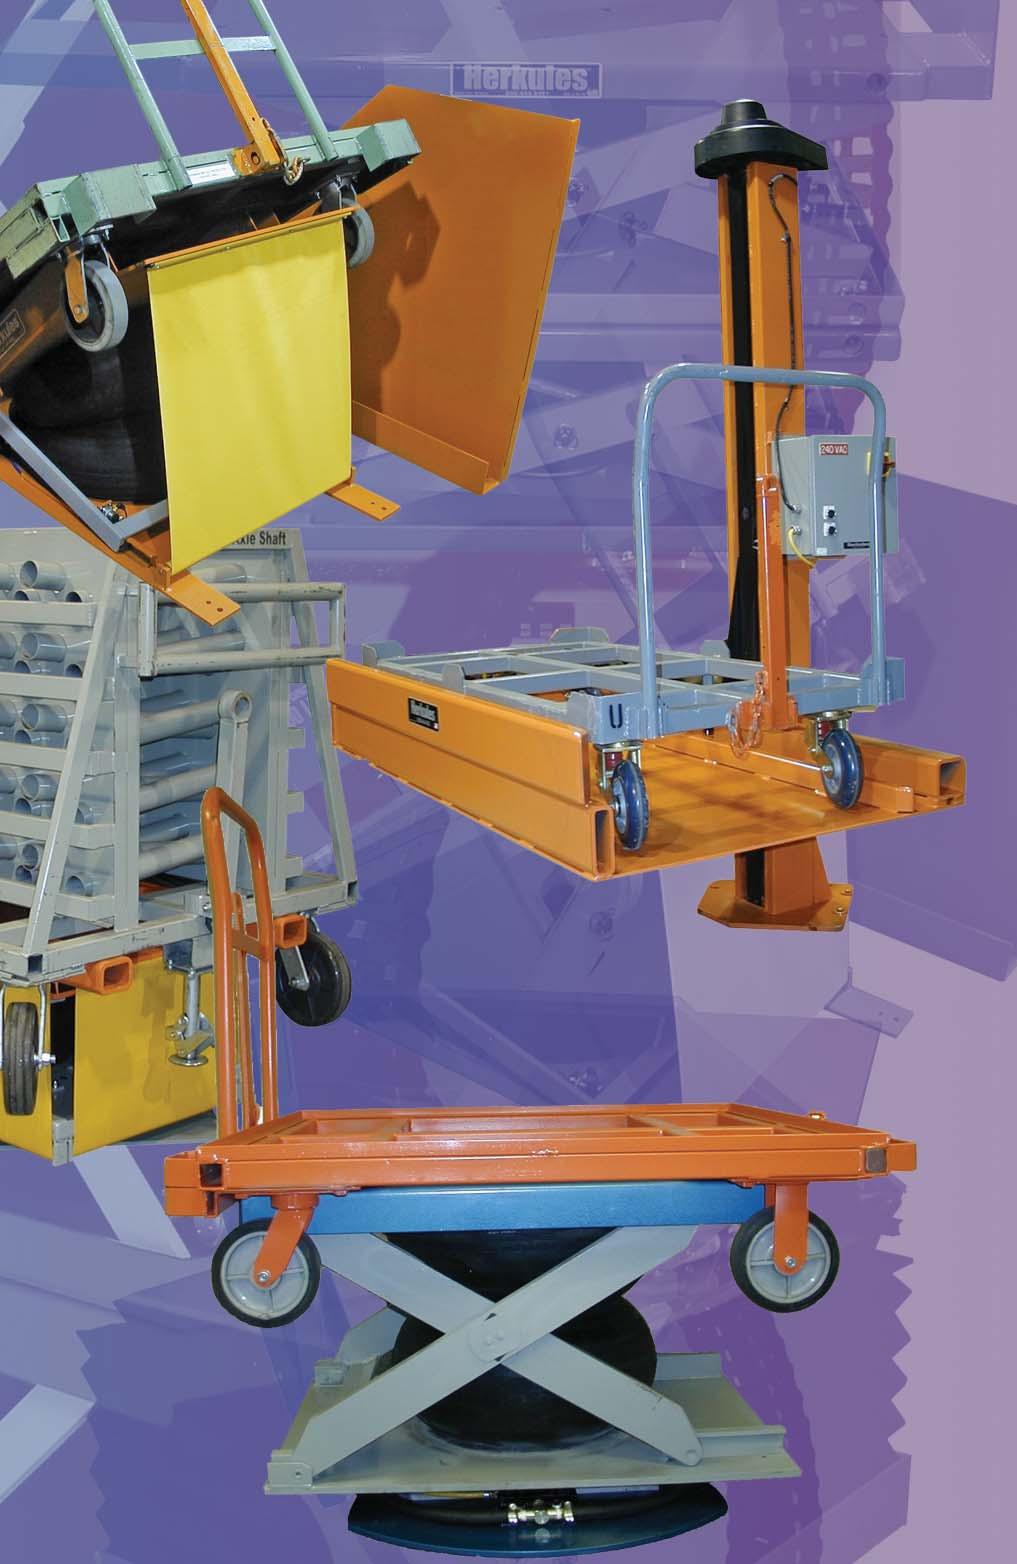 For more than 25 years Herkules lifts have been recognized worldwide for lifting capacity,